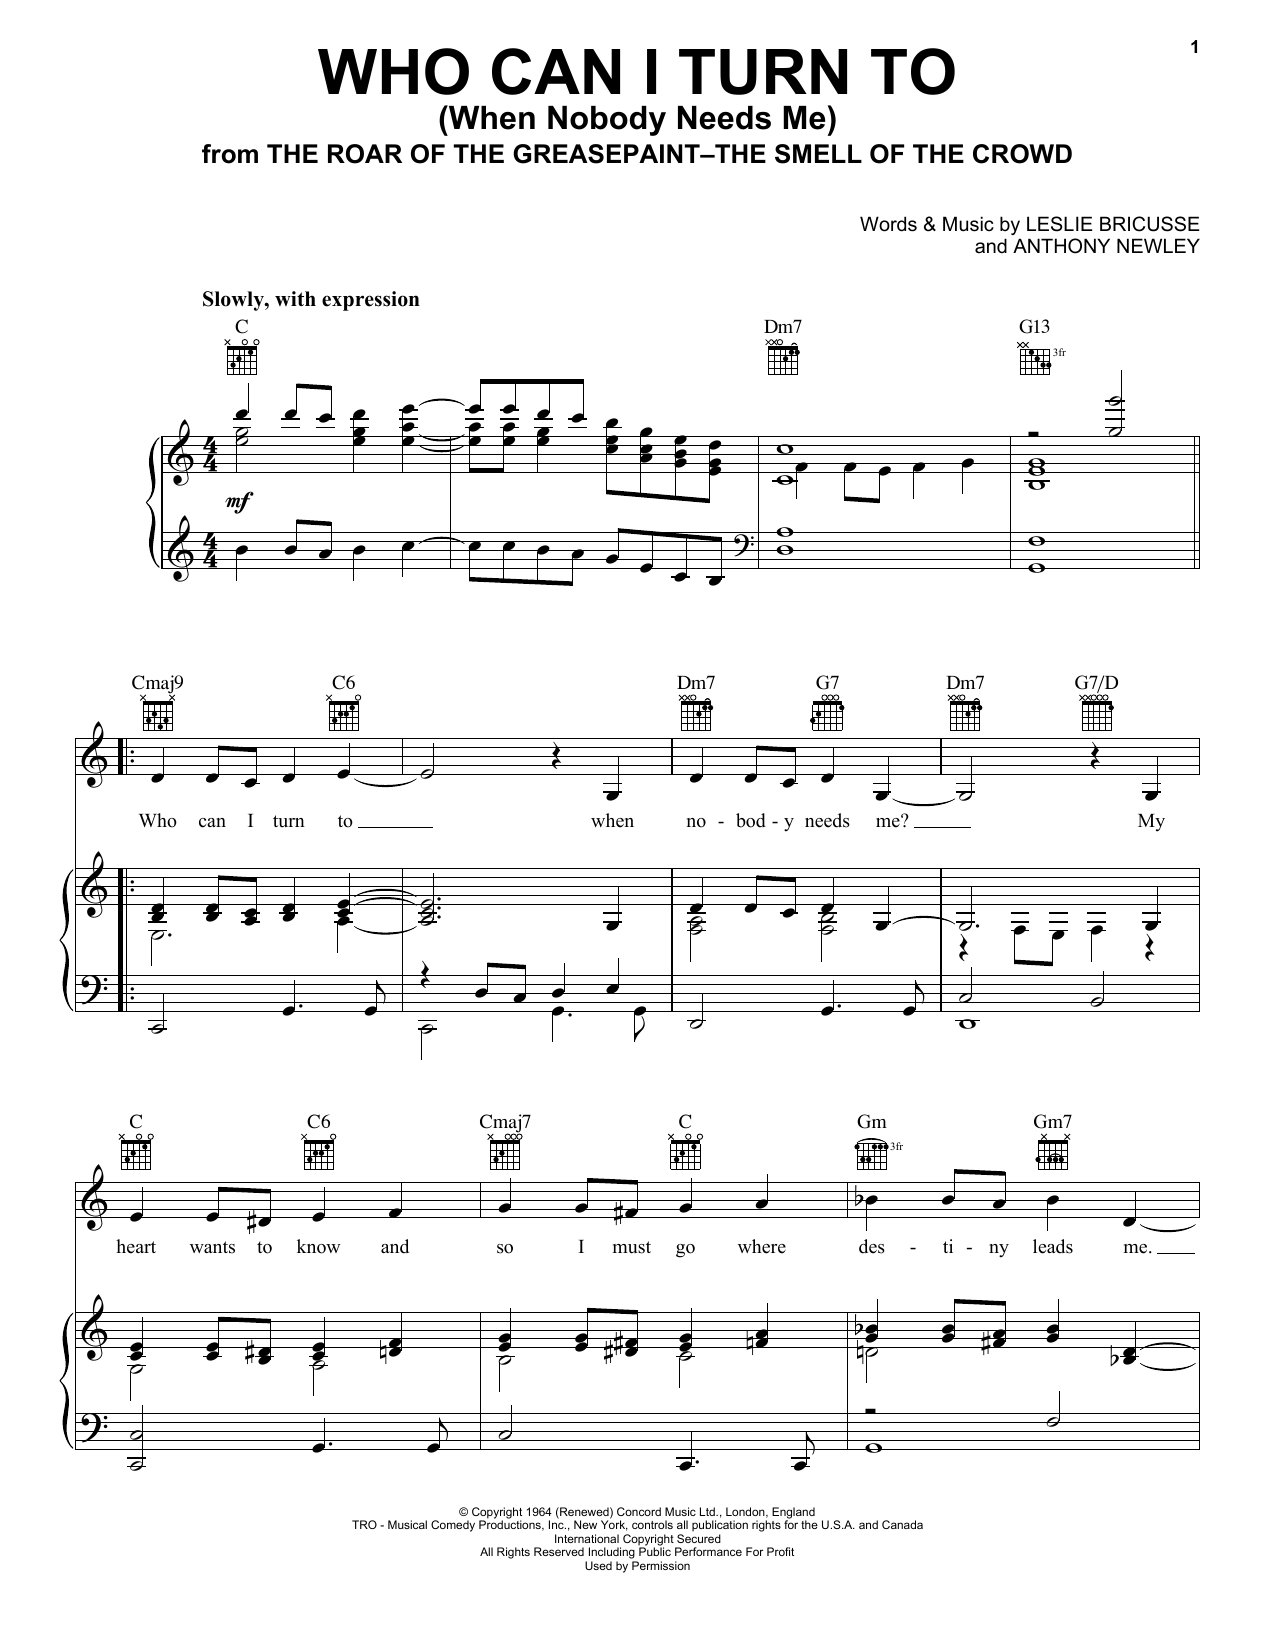 Download Tony Bennett Who Can I Turn To (When Nobody Needs Me Sheet Music